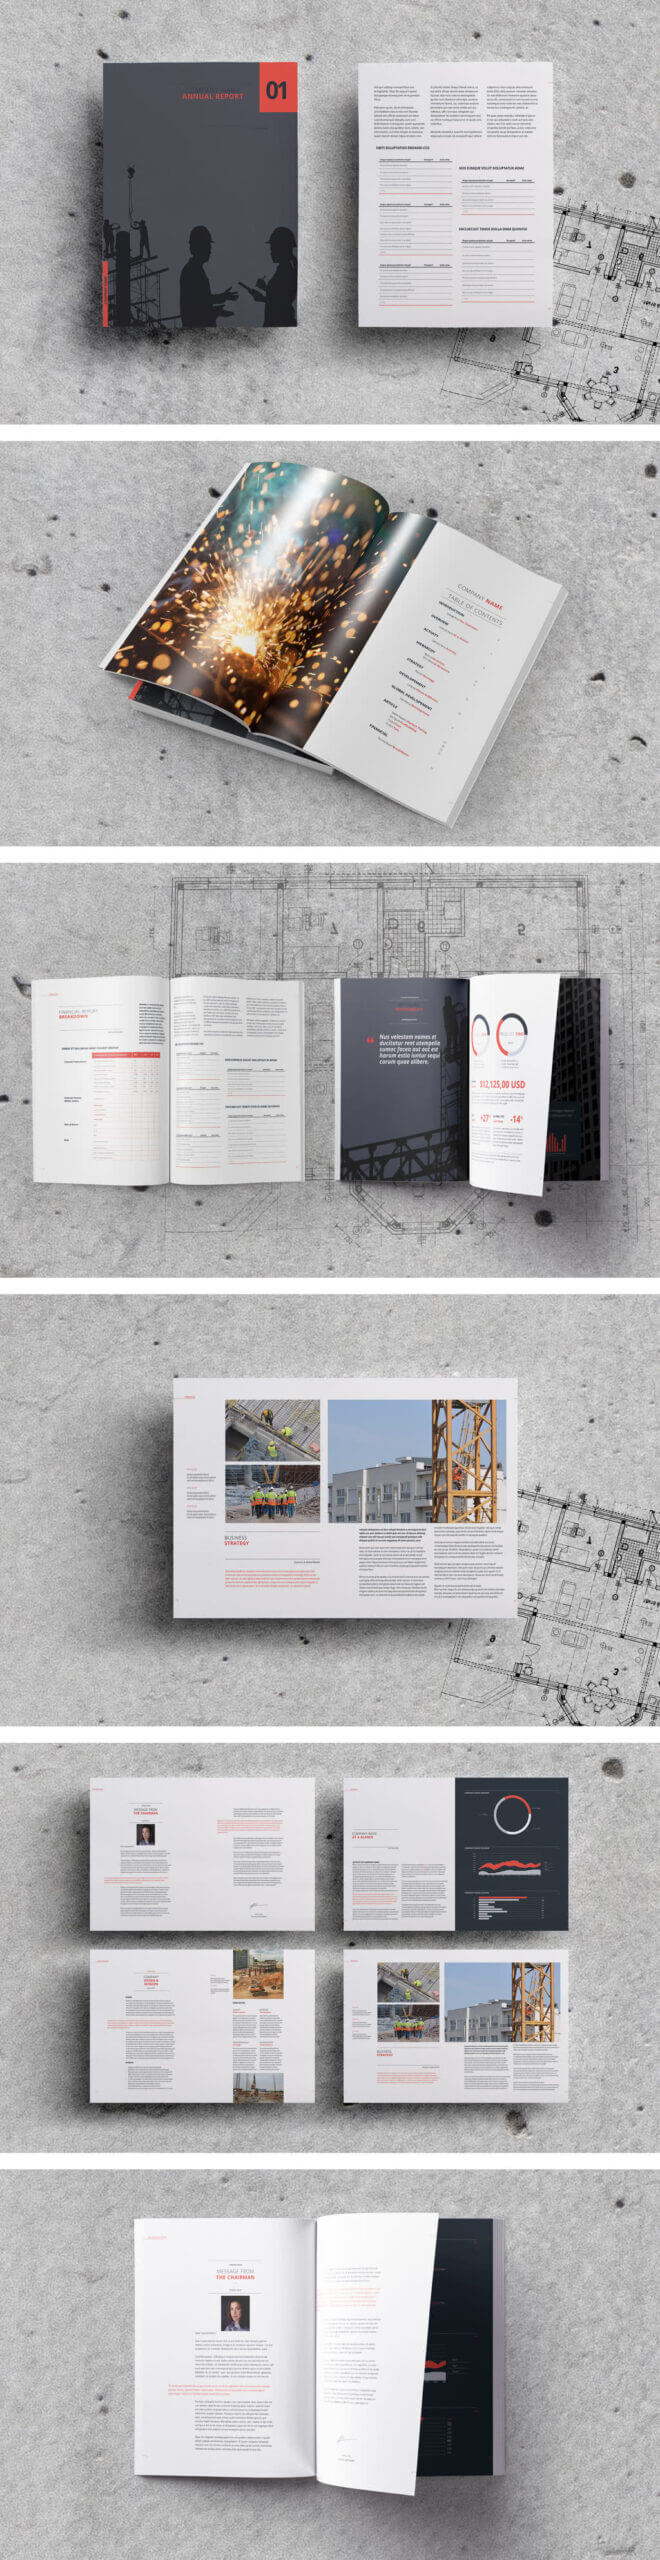 75 Fresh Indesign Templates And Where To Find More With Regard To Ind Annual Report Template